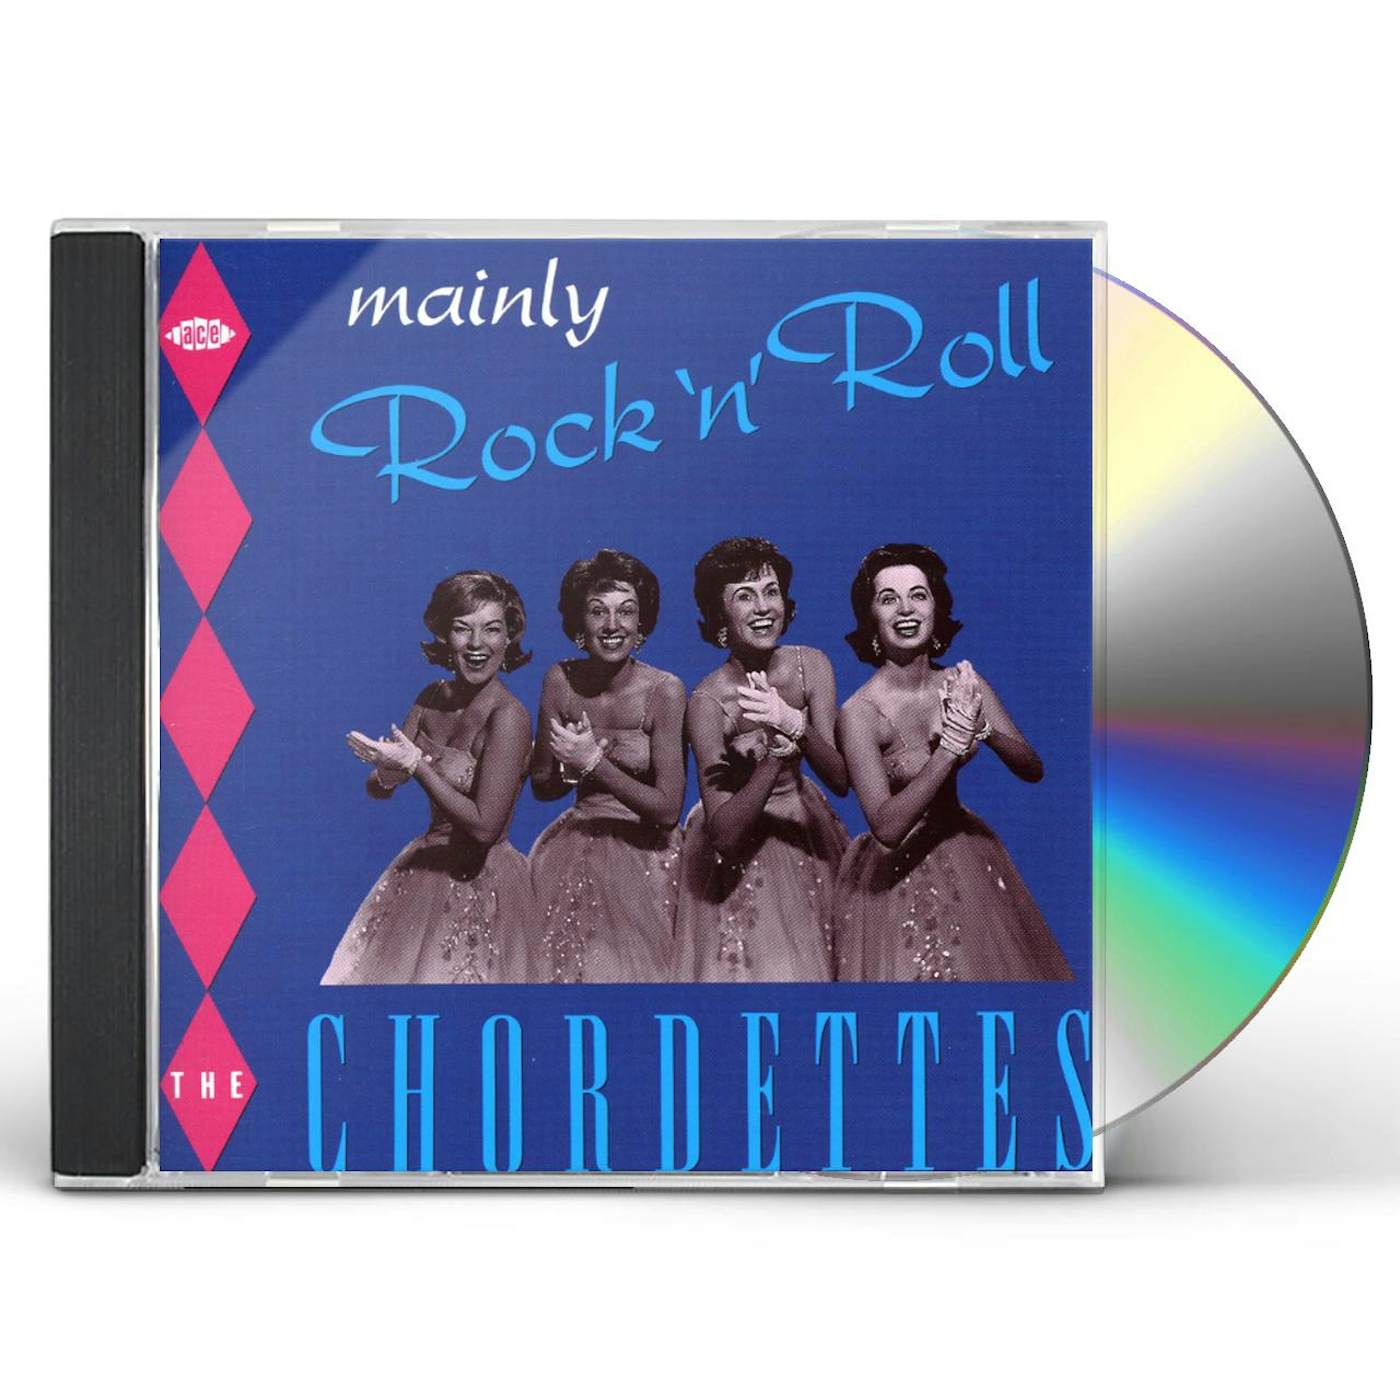 The Chordettes MAINLY ROCK N ROLL CD